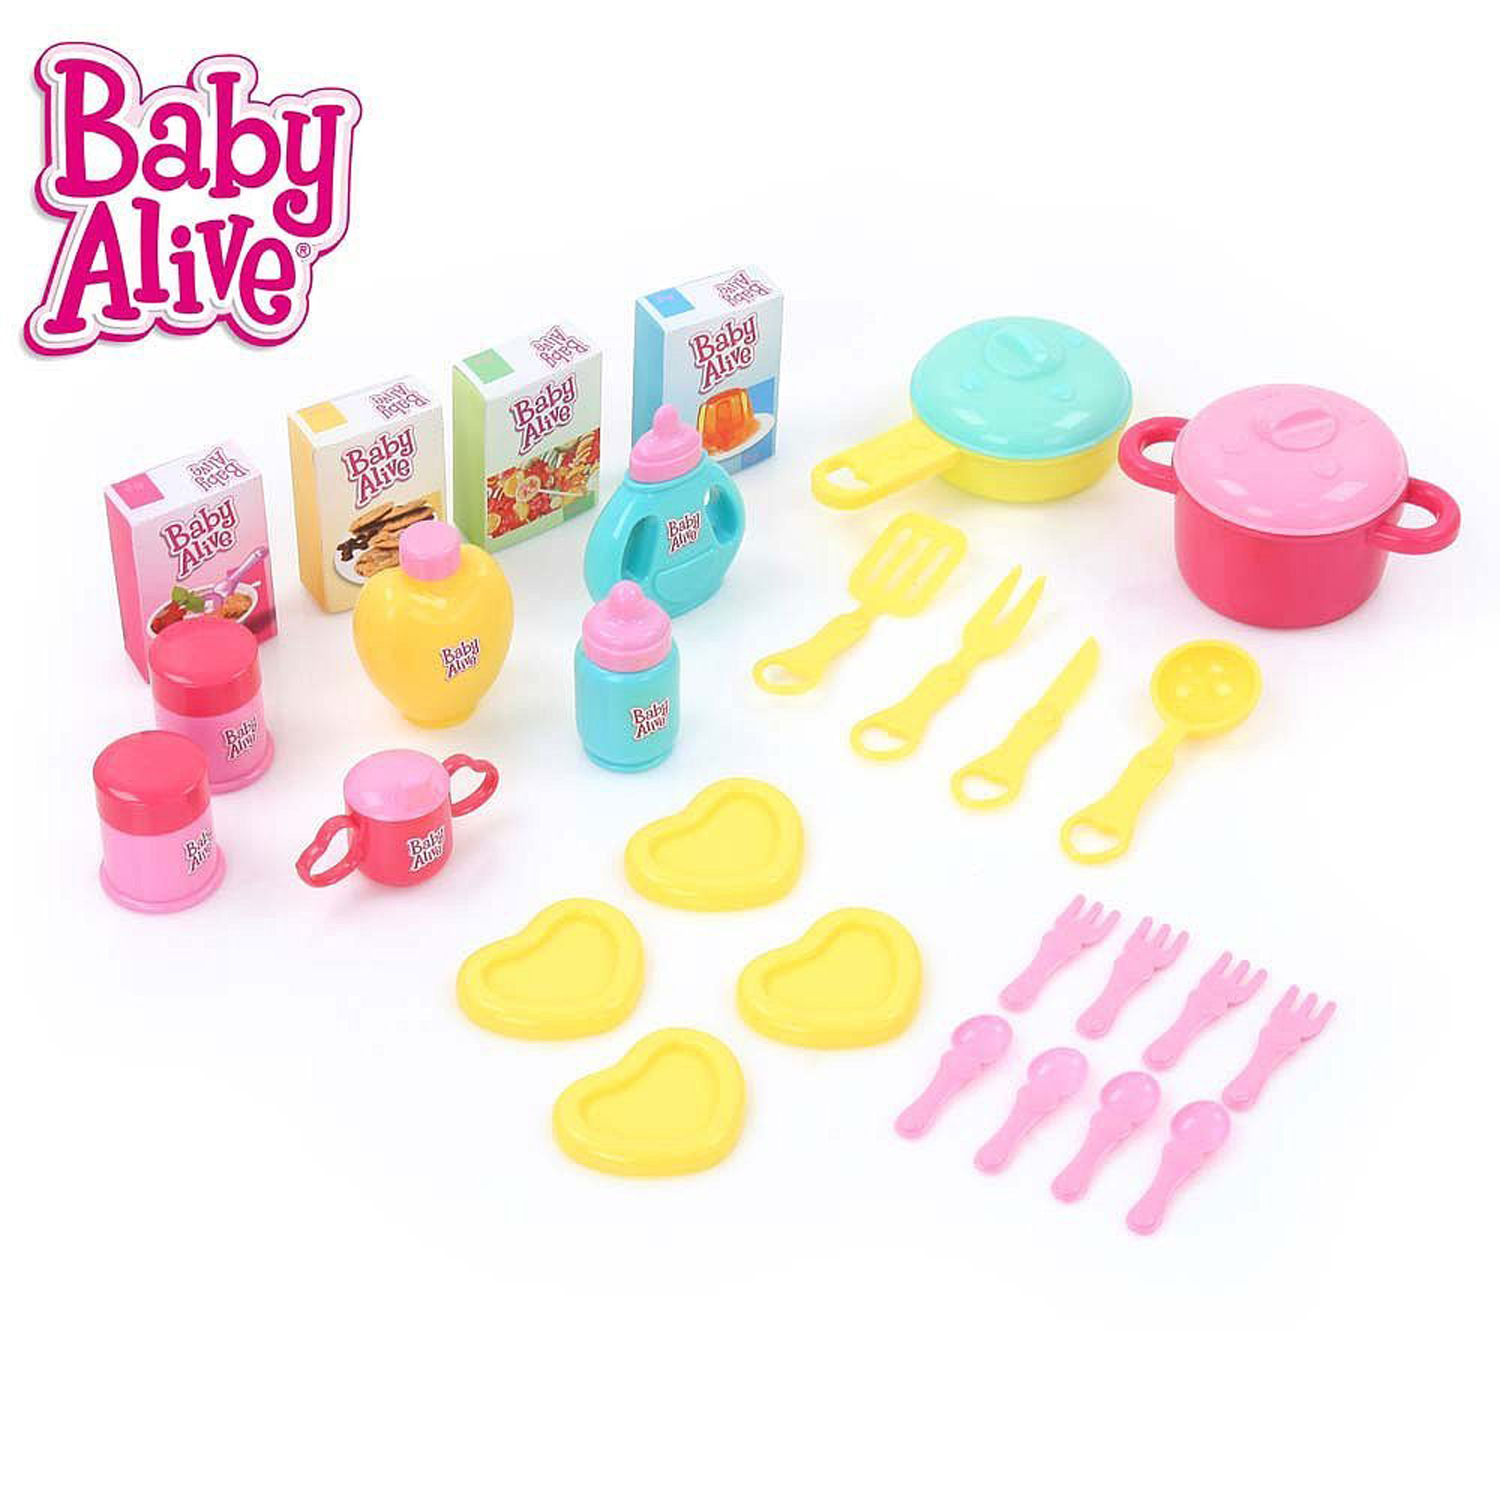 Baby Alive Doll 3 in 1 Cook ?n Care Play Set - image 3 of 8